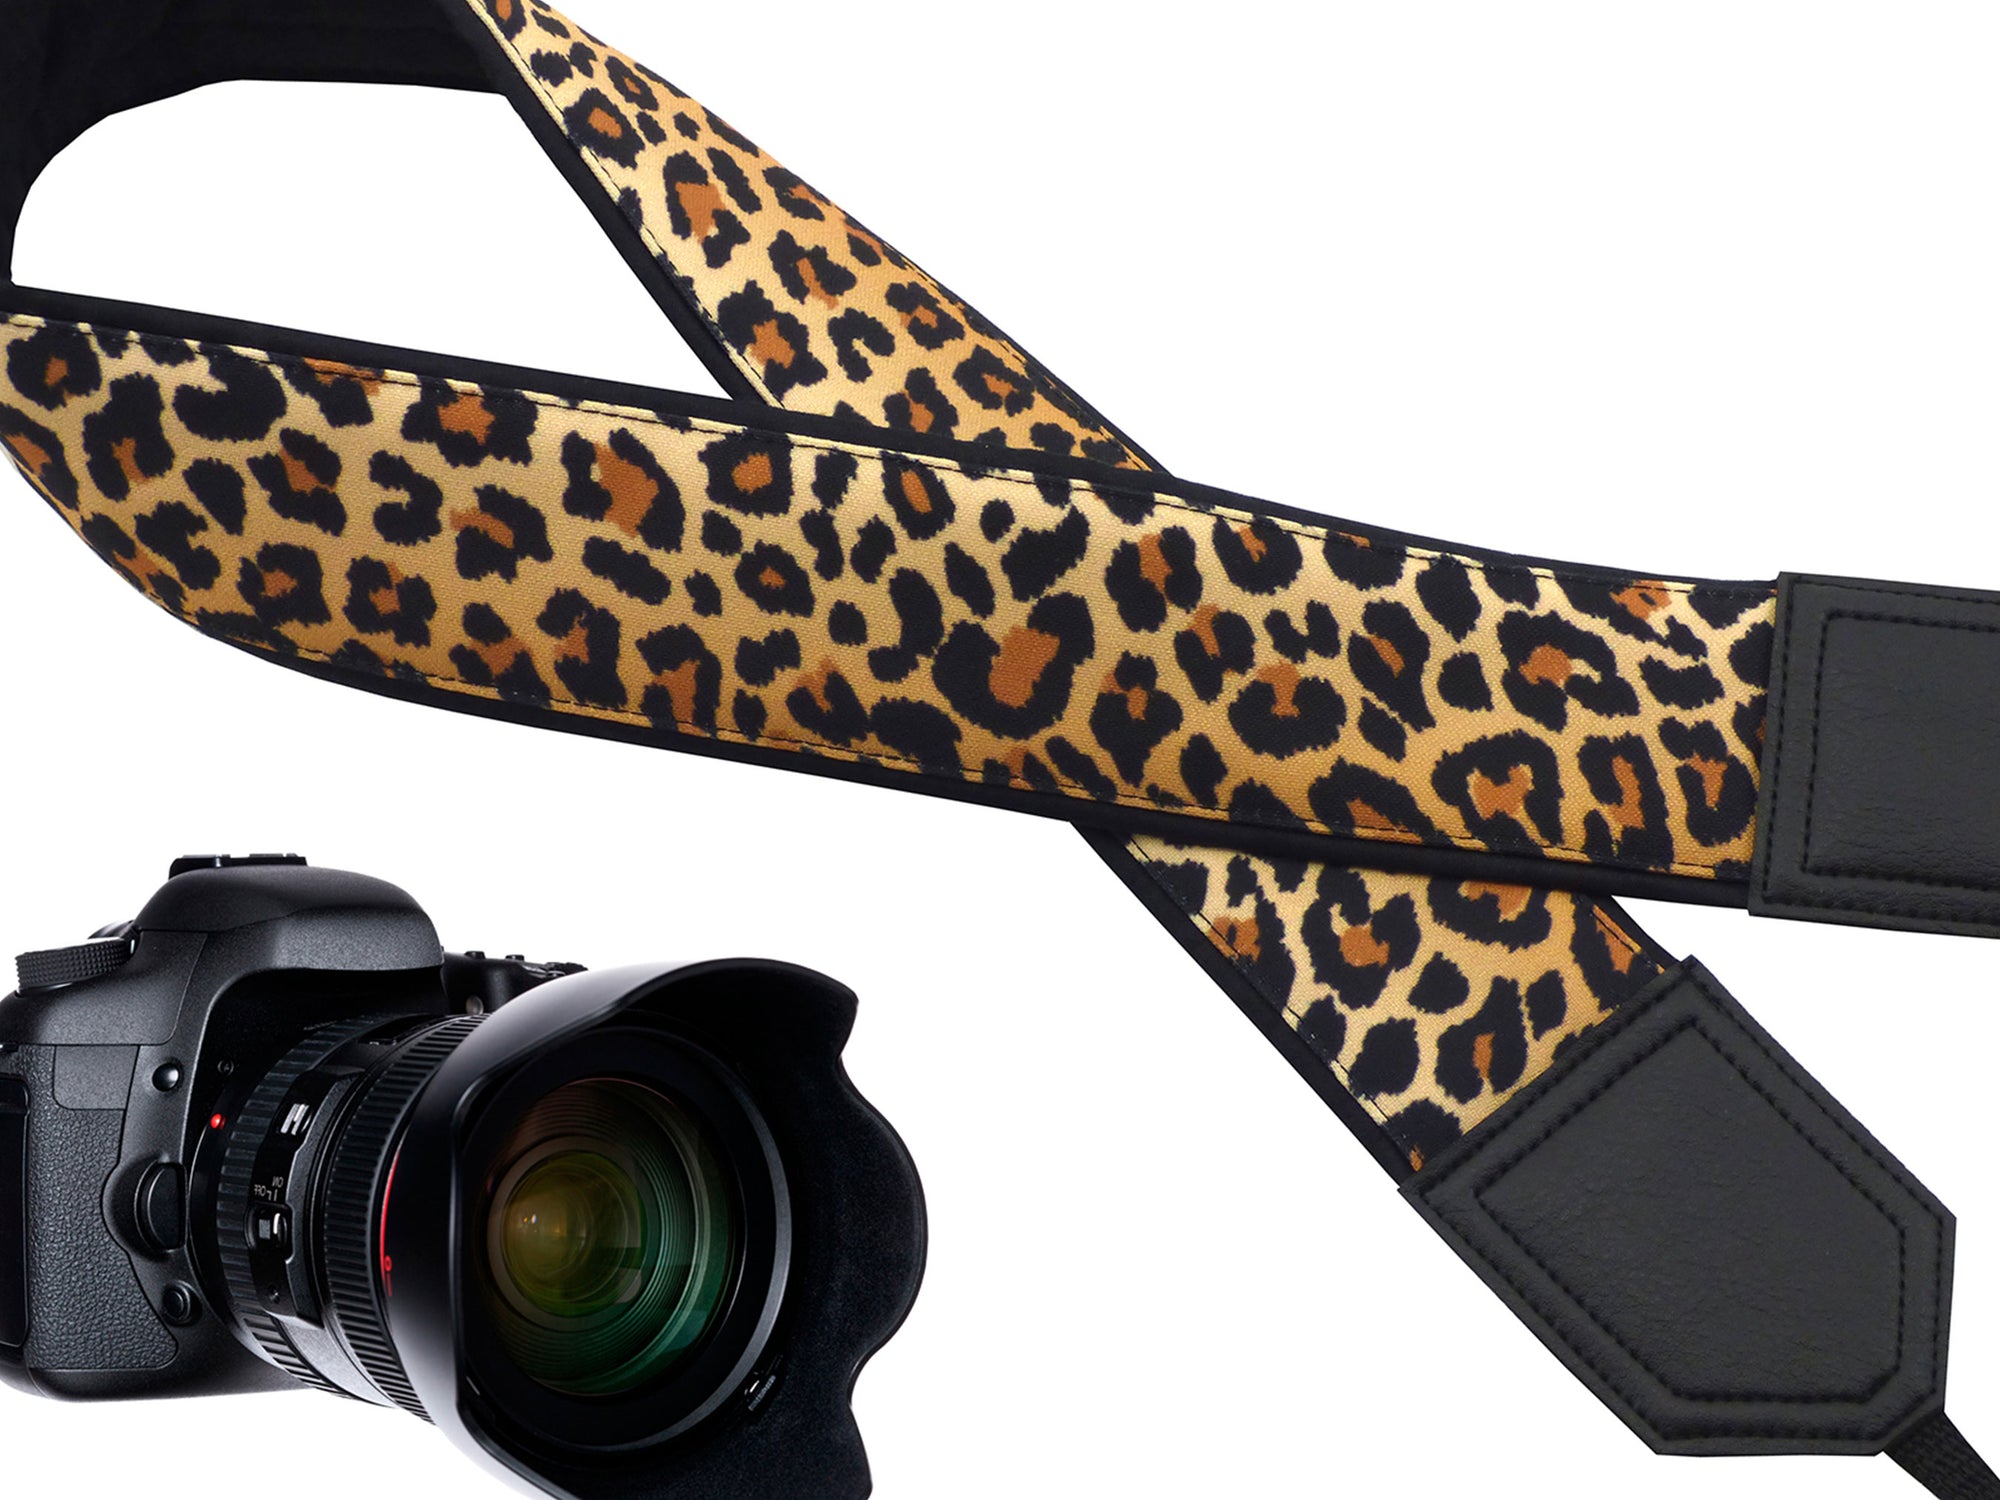 Personalized camera strap. Comfy and durable strap. Leopard Jaguar print camera strap for wild animal lovers. Best gift for photographers.